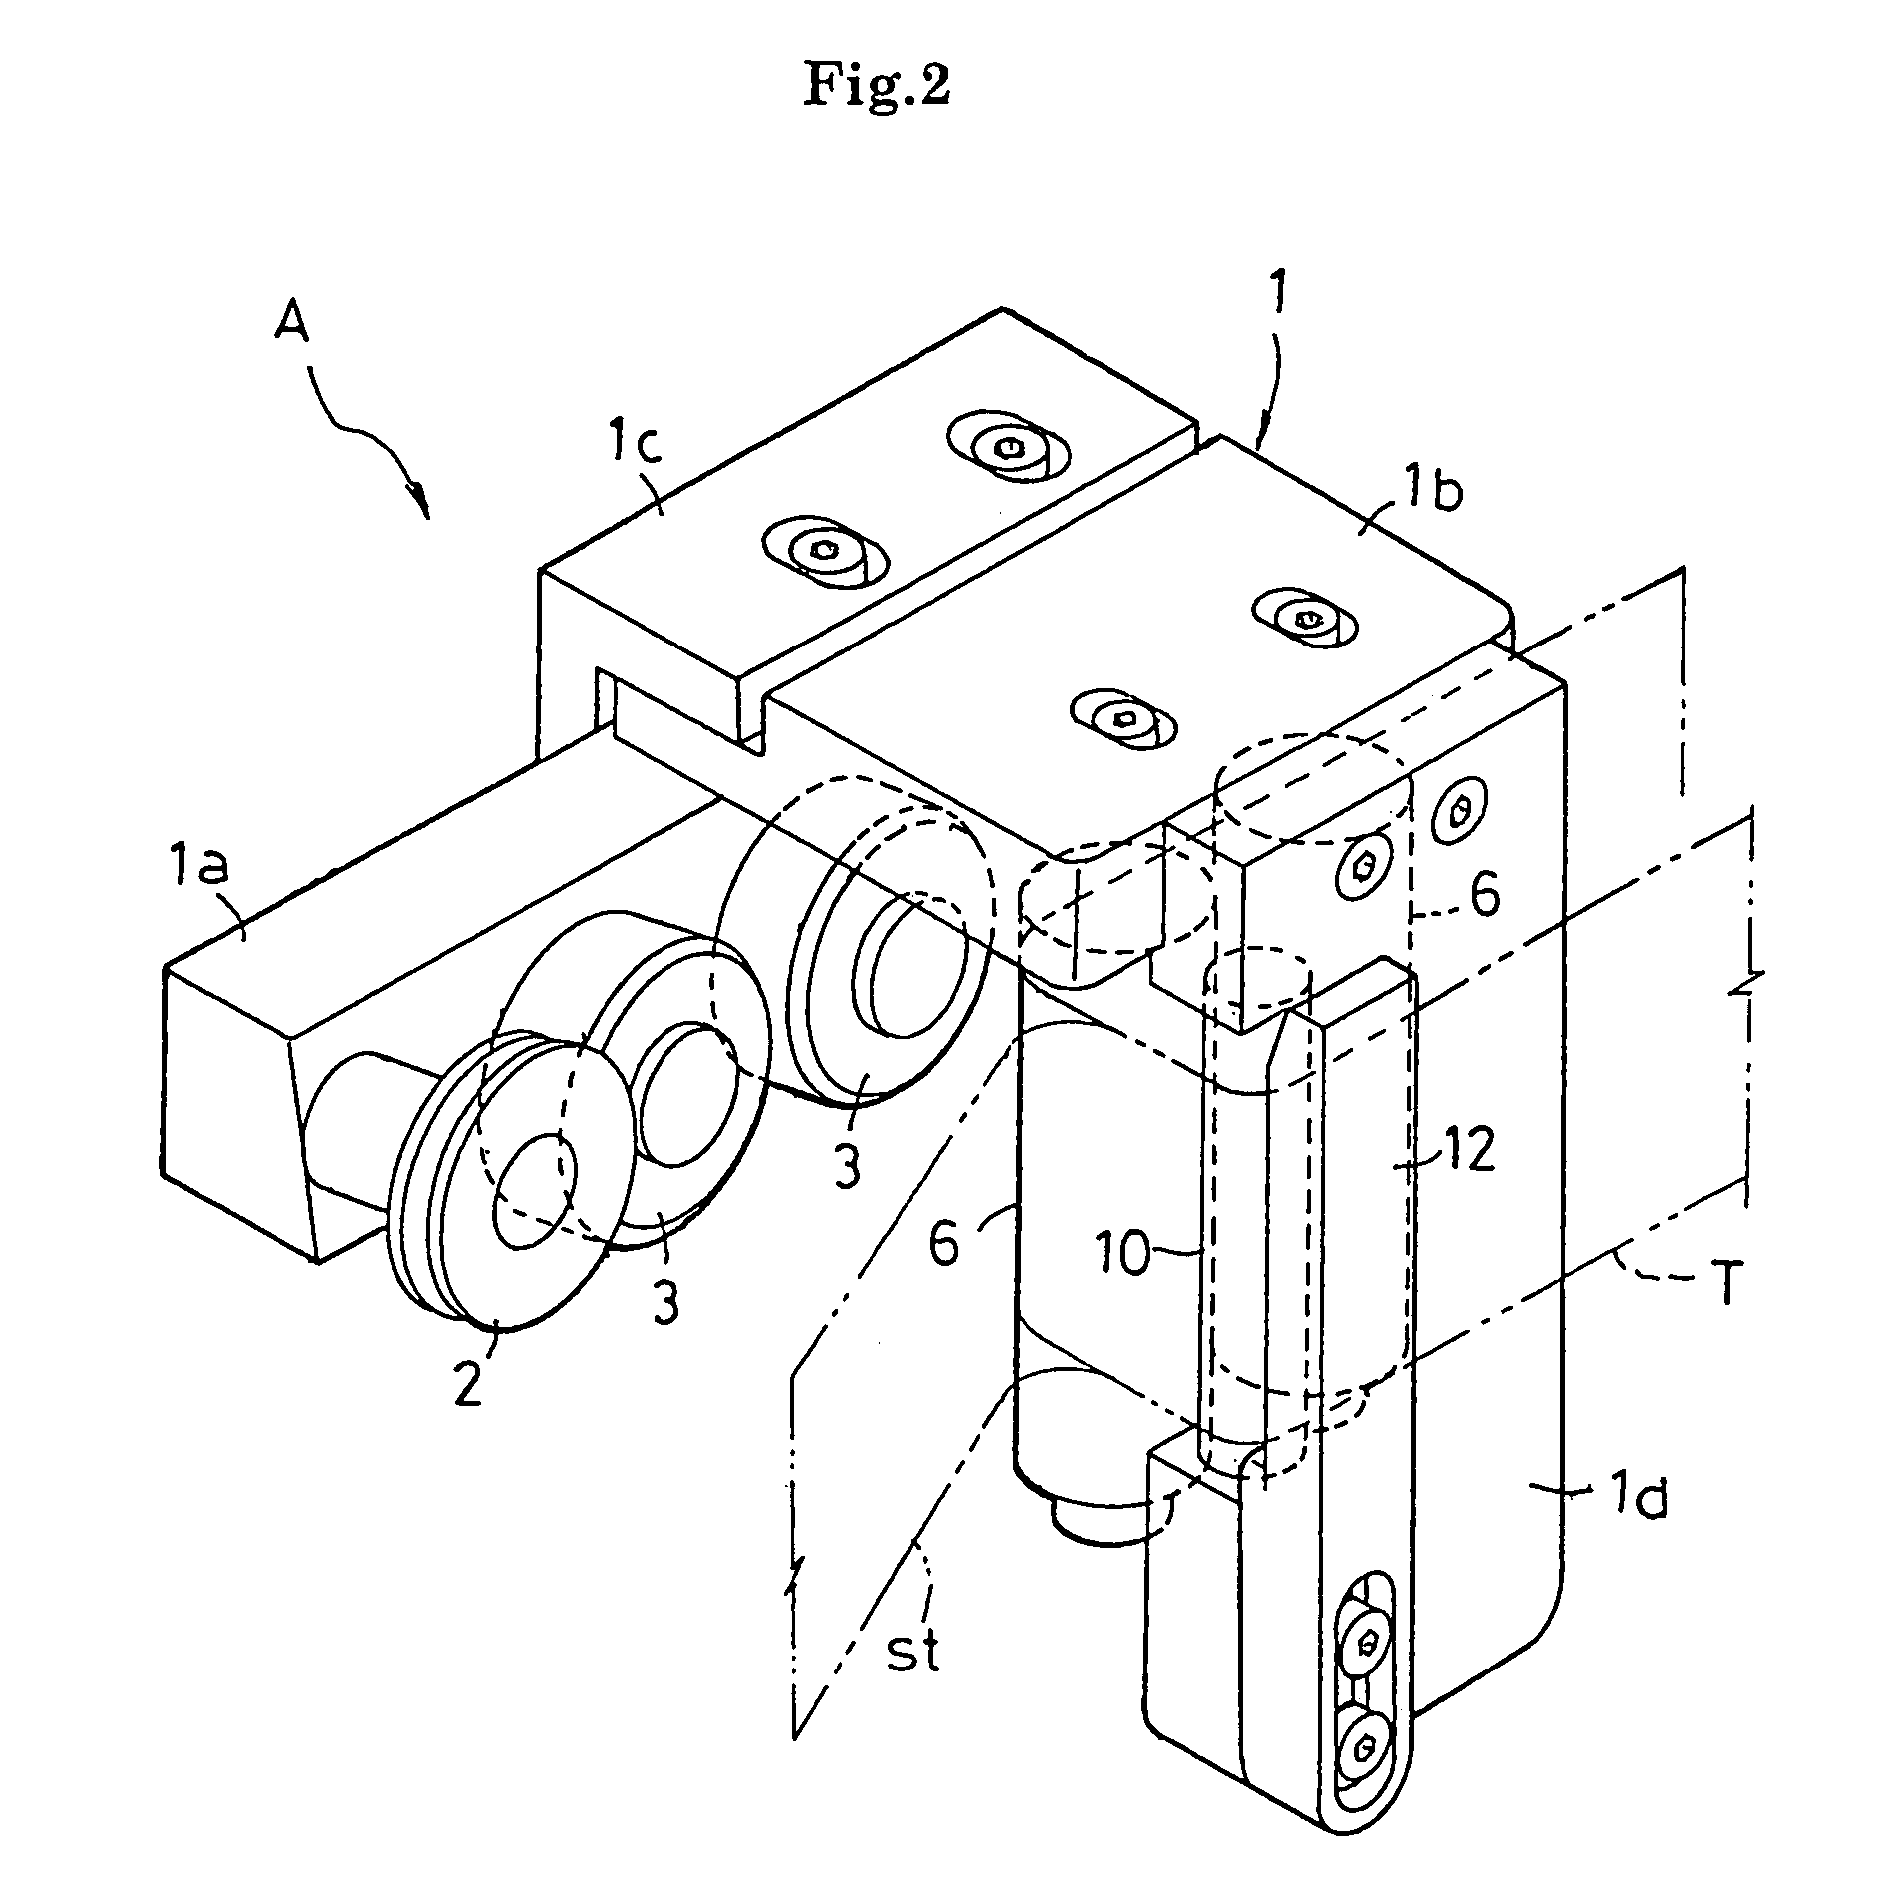 Method and apparatus for joining adhesive tape